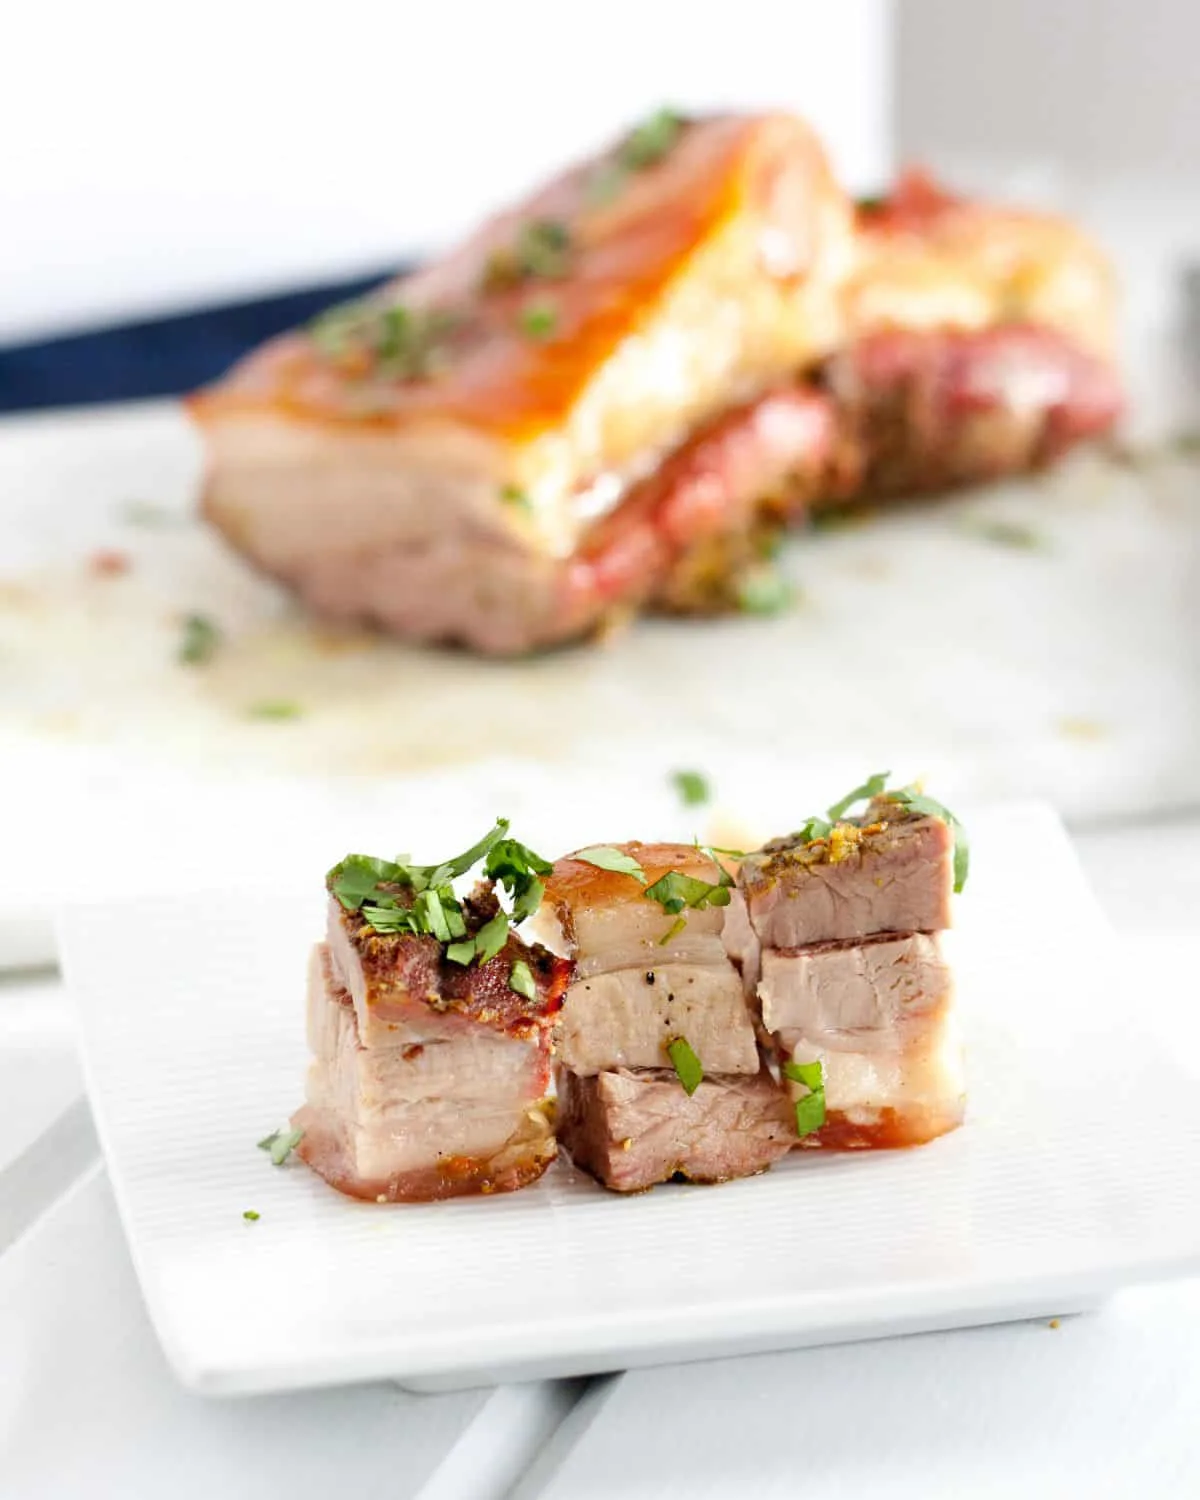 Crispy Pork Belly is easy to make in the oven. This recipe has a beautiful blend of flavors like tumeric, garlic, and cinnamon, so the leftovers are even better! Serve freshly roasted for Chinese New Year or cut into cubes and slices and pan fry for an extra crispy treat!